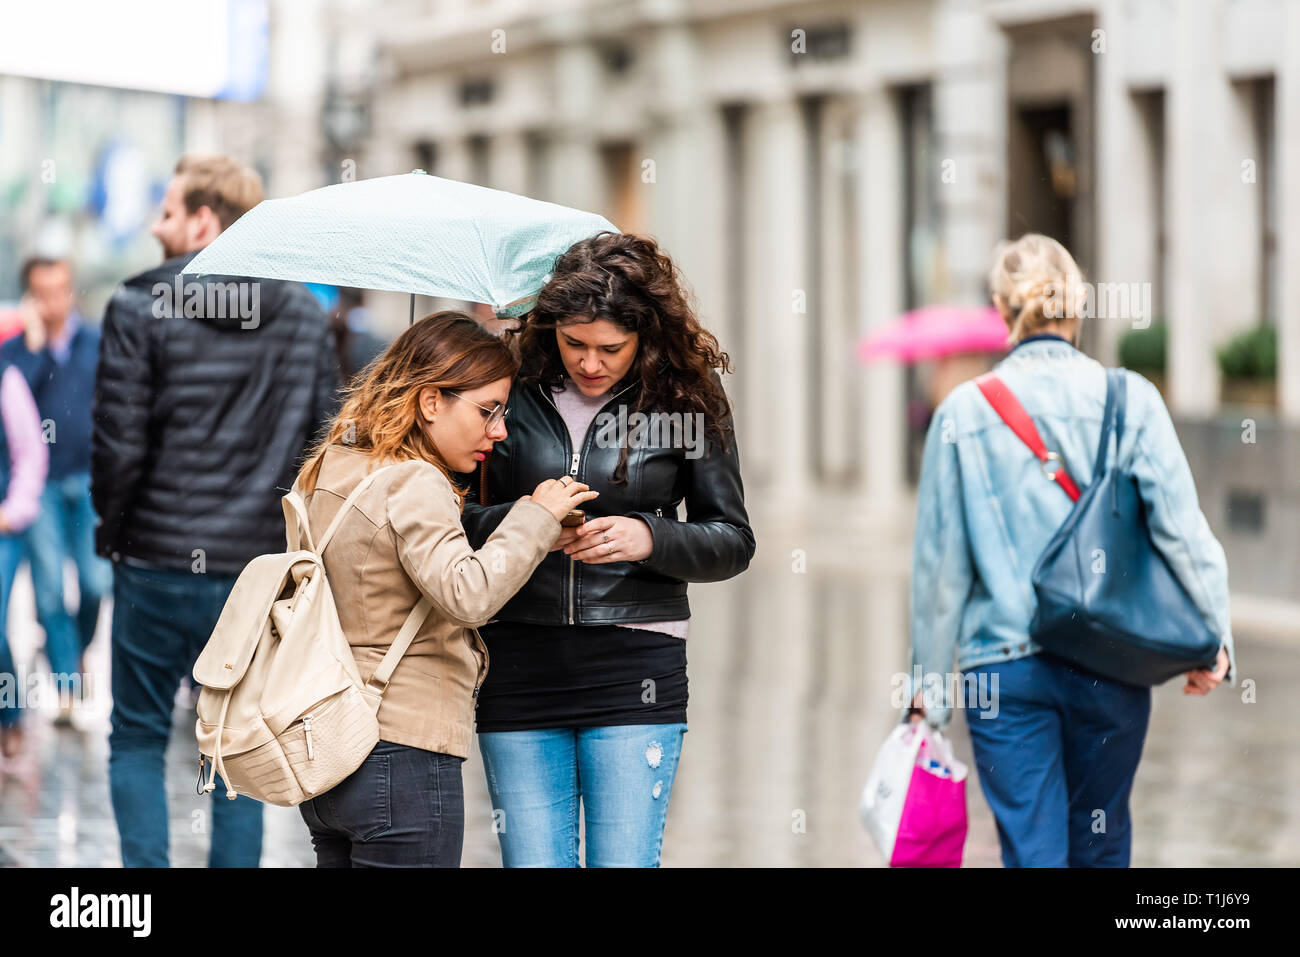 London, UK - September 12, 2018: Two women standing walking with umbrella in rainy city weather on sidewalk street wet road shopping in SoHo lost look Stock Photo